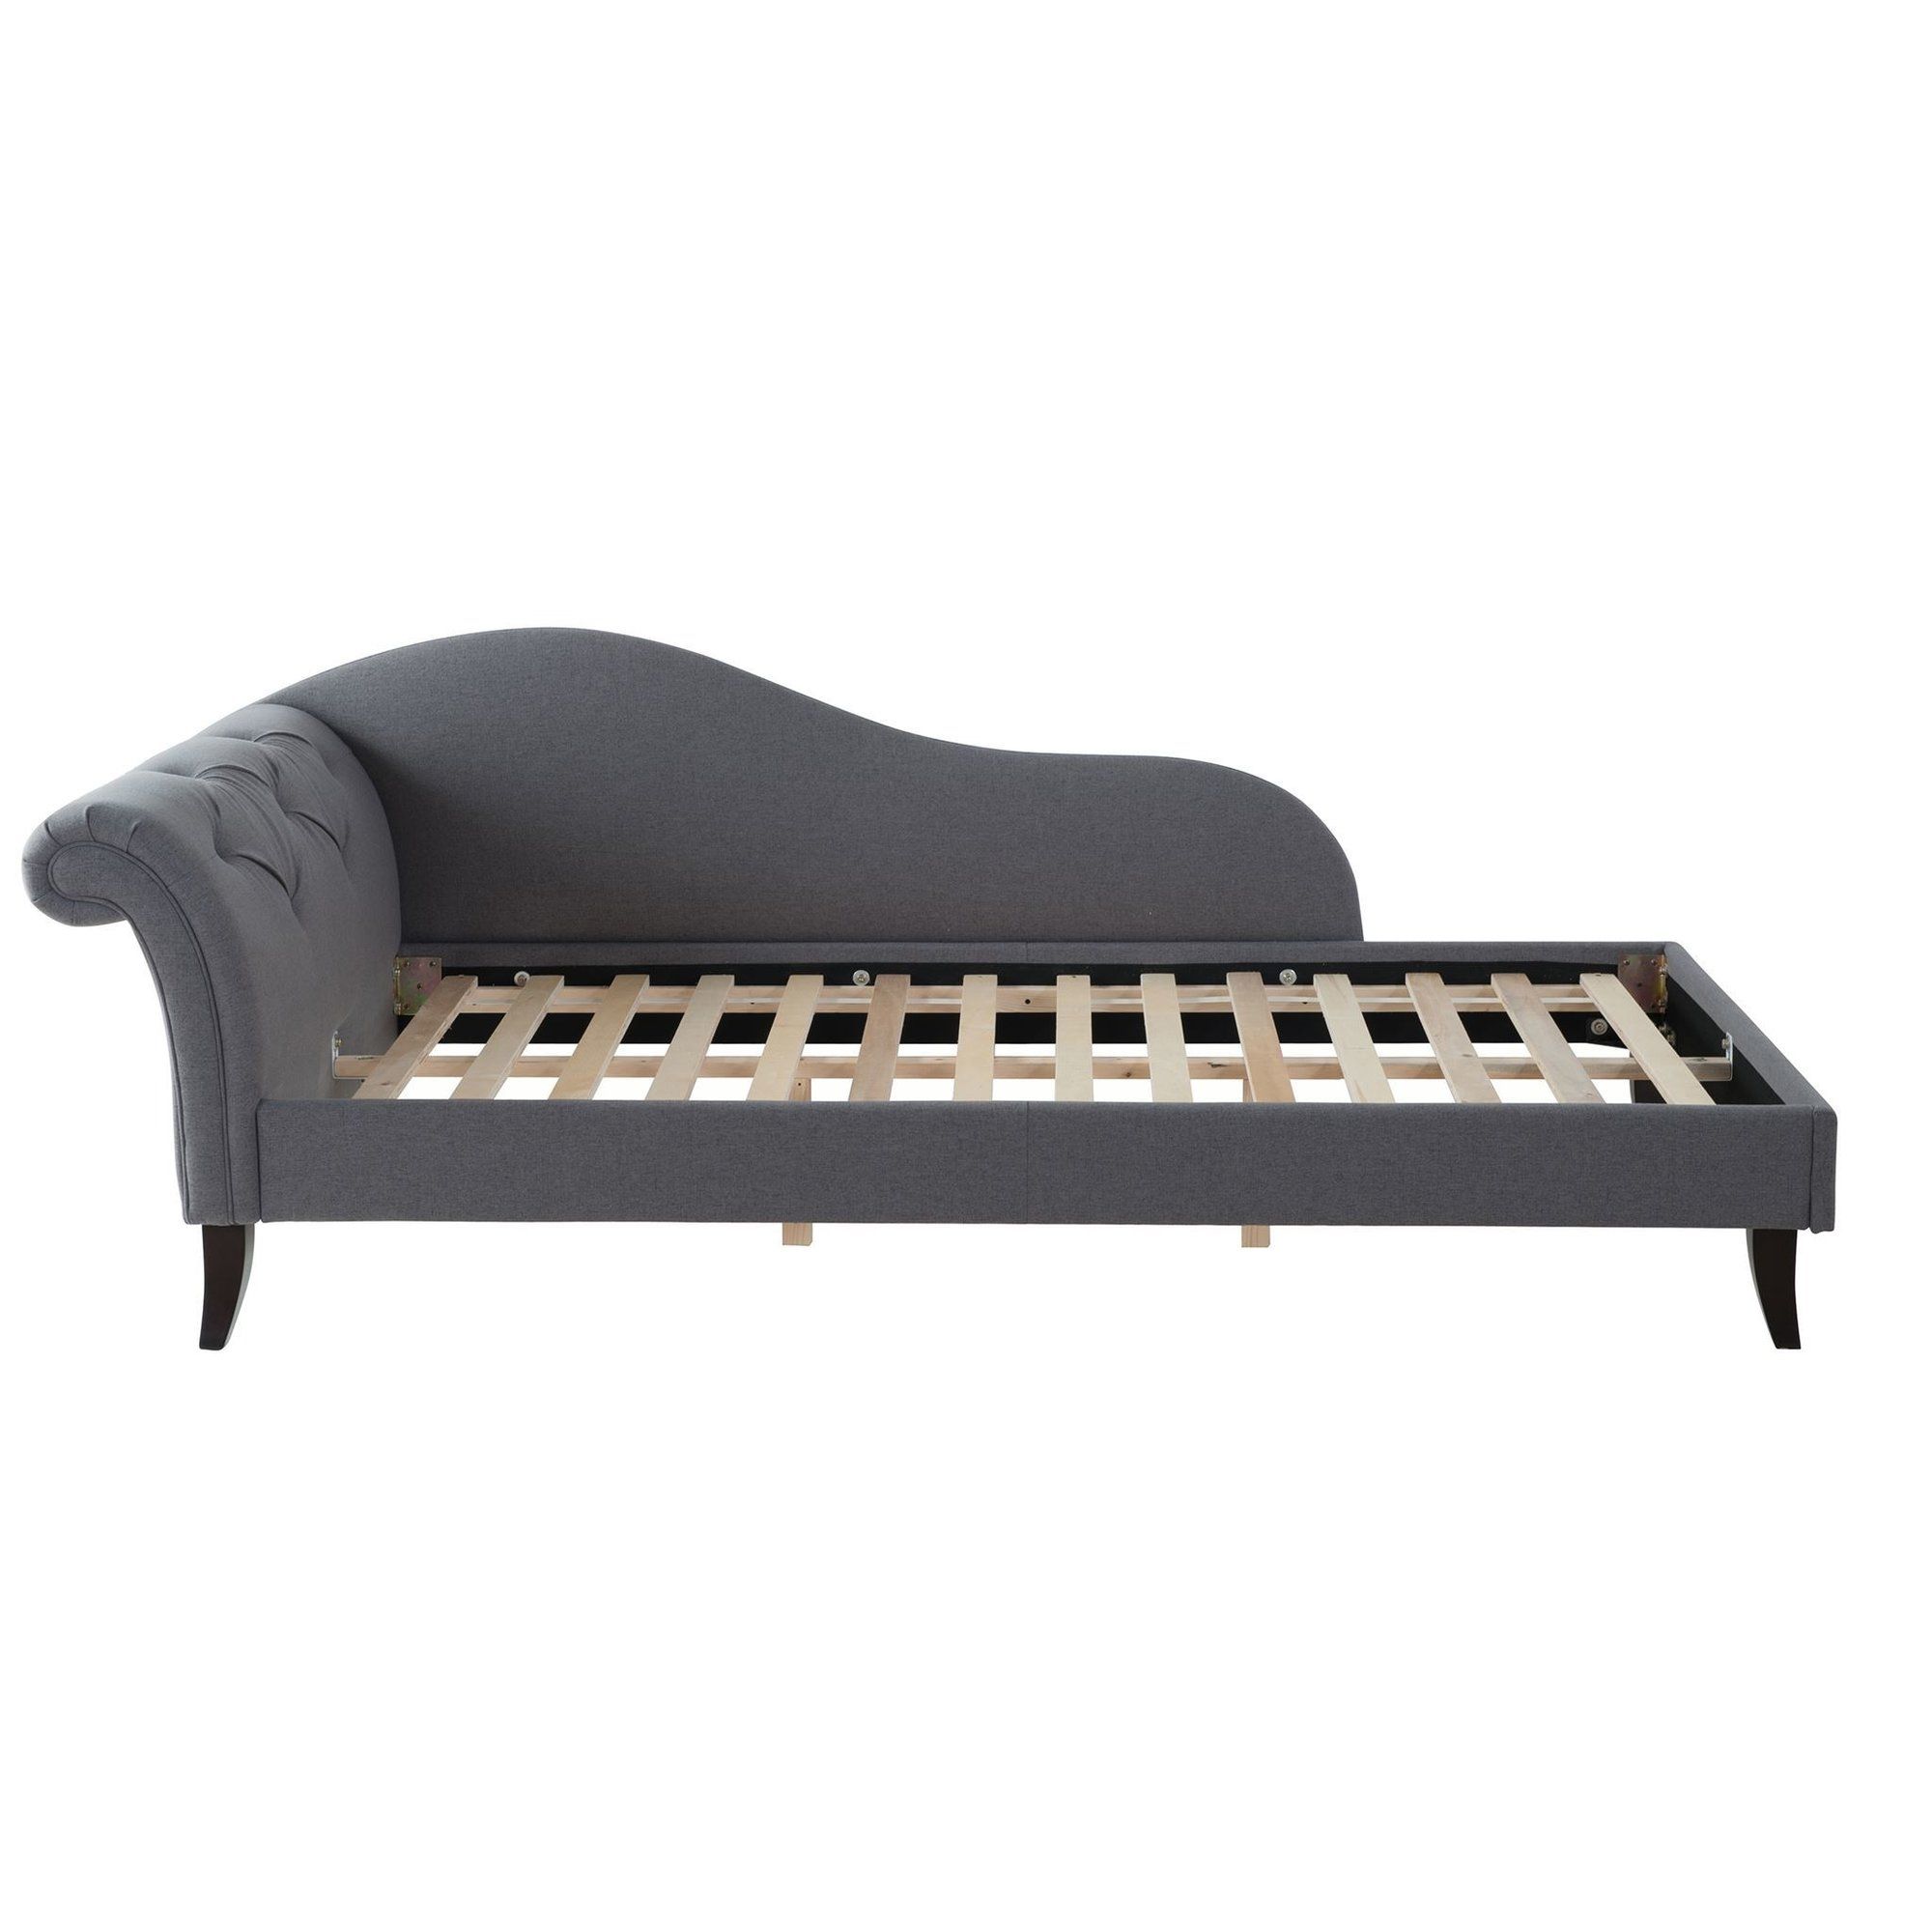 Mercer41 Reede Tiffany Chaise Sofa Reviews Wayfair For Backless Chaise Sofa (Photo 11 of 12)